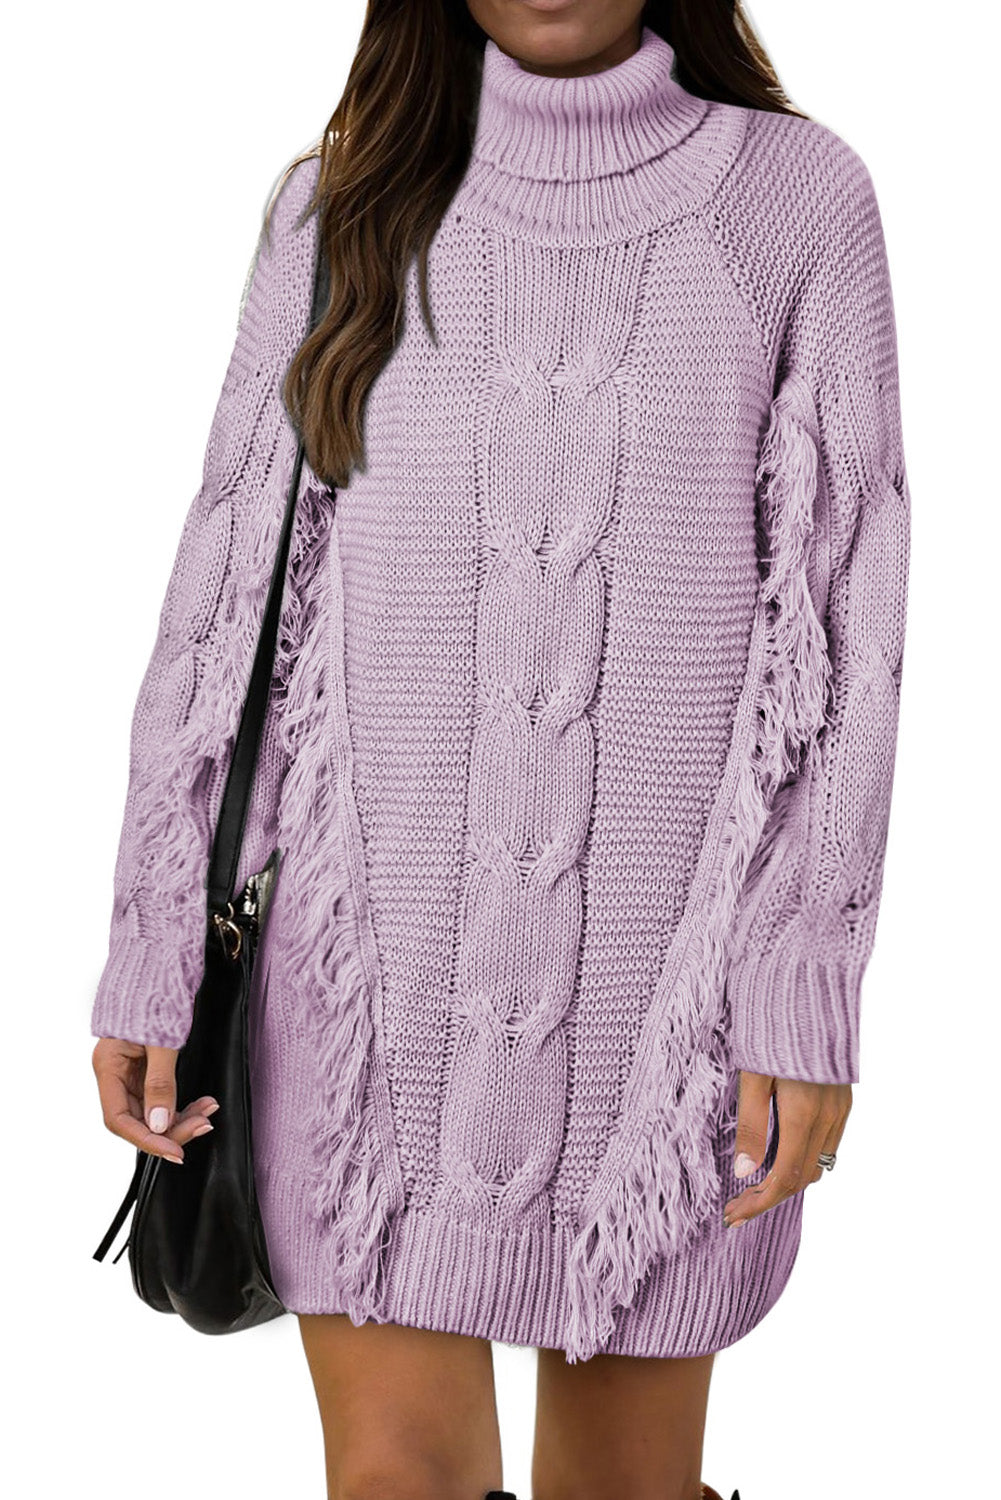 LC273304-8-S, LC273304-8-M, LC273304-8-L, LC273304-8-XL, LC273304-8-2XL, Purple Womens Twist Fringe Cable Knit High Neck Oversized Sweater Dress